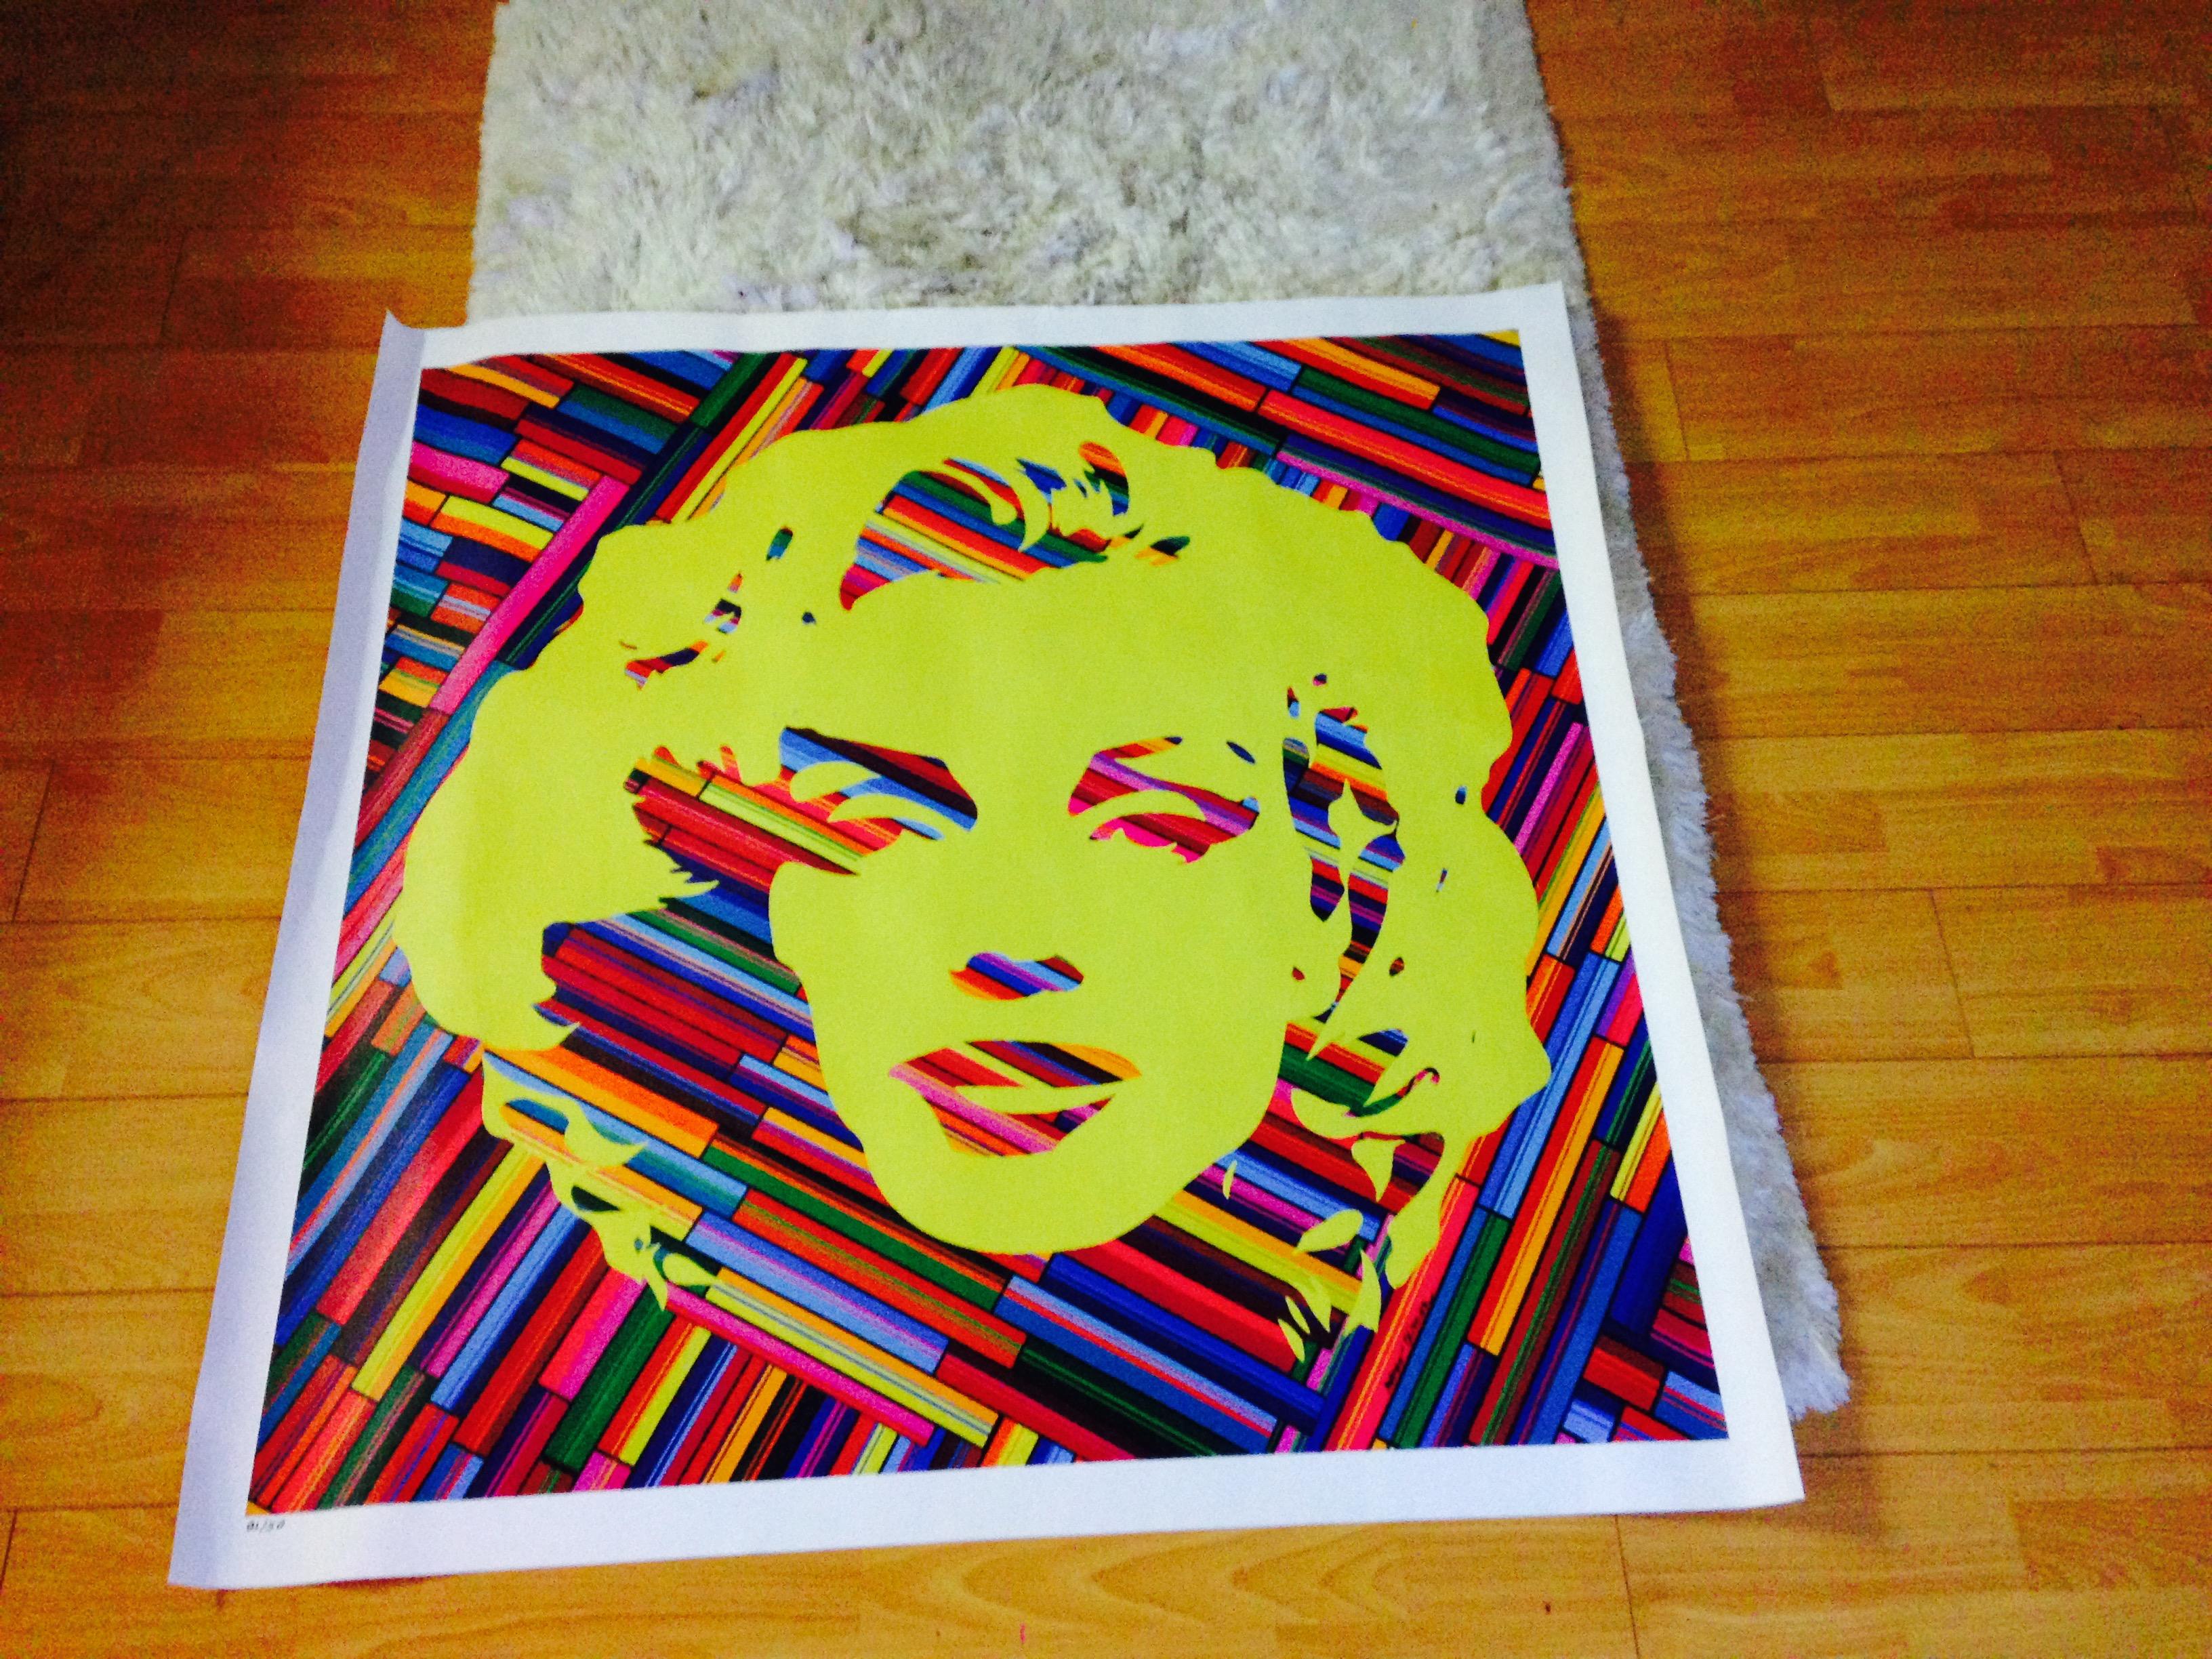 Celebrating the one and only Marilyn Monroe by Mauro Oliveira. 

Limited edition of 30 museum quality Giclee prints on PAPER, signed and numbered by the artist. Print lead time 1 week. 

A 